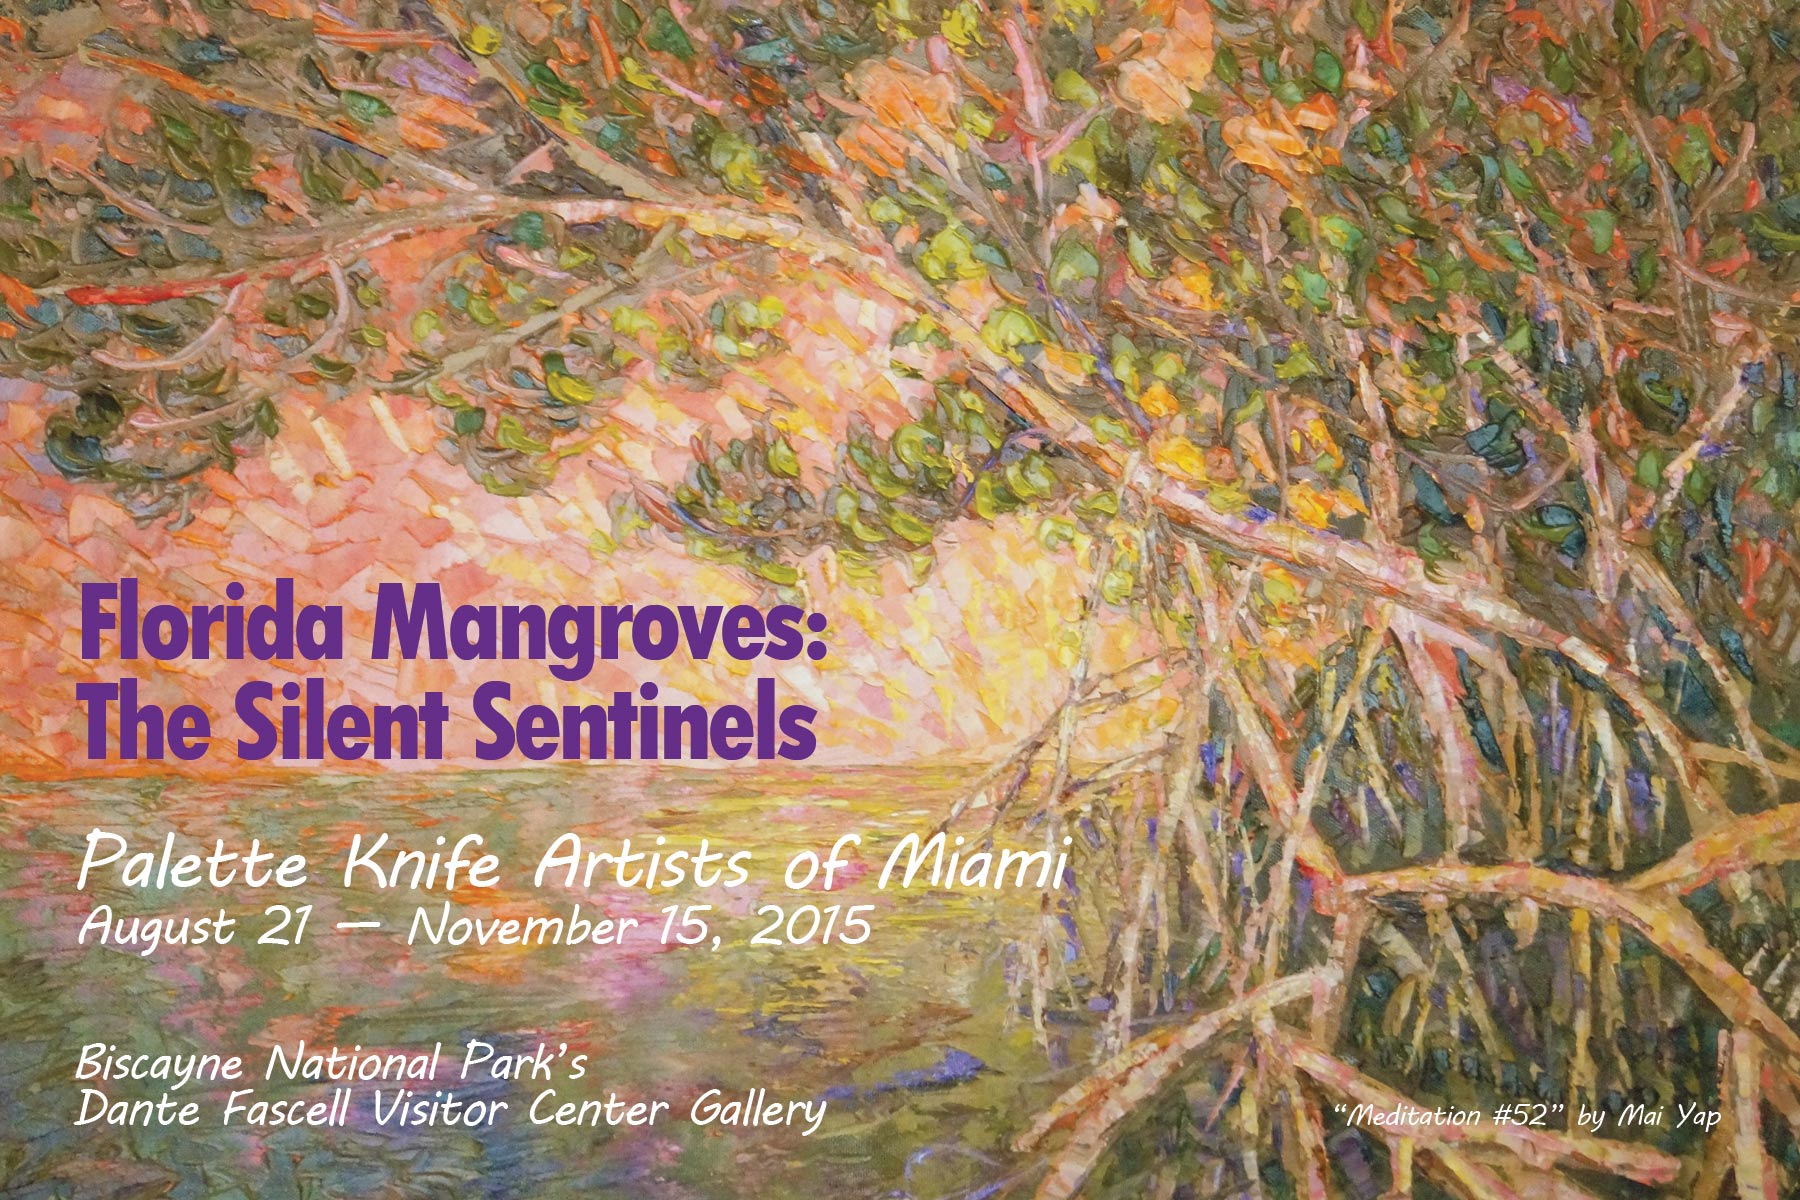 The Palette Knife Artists of Miami have found inspiration in the very soul of the Florida mangroves.